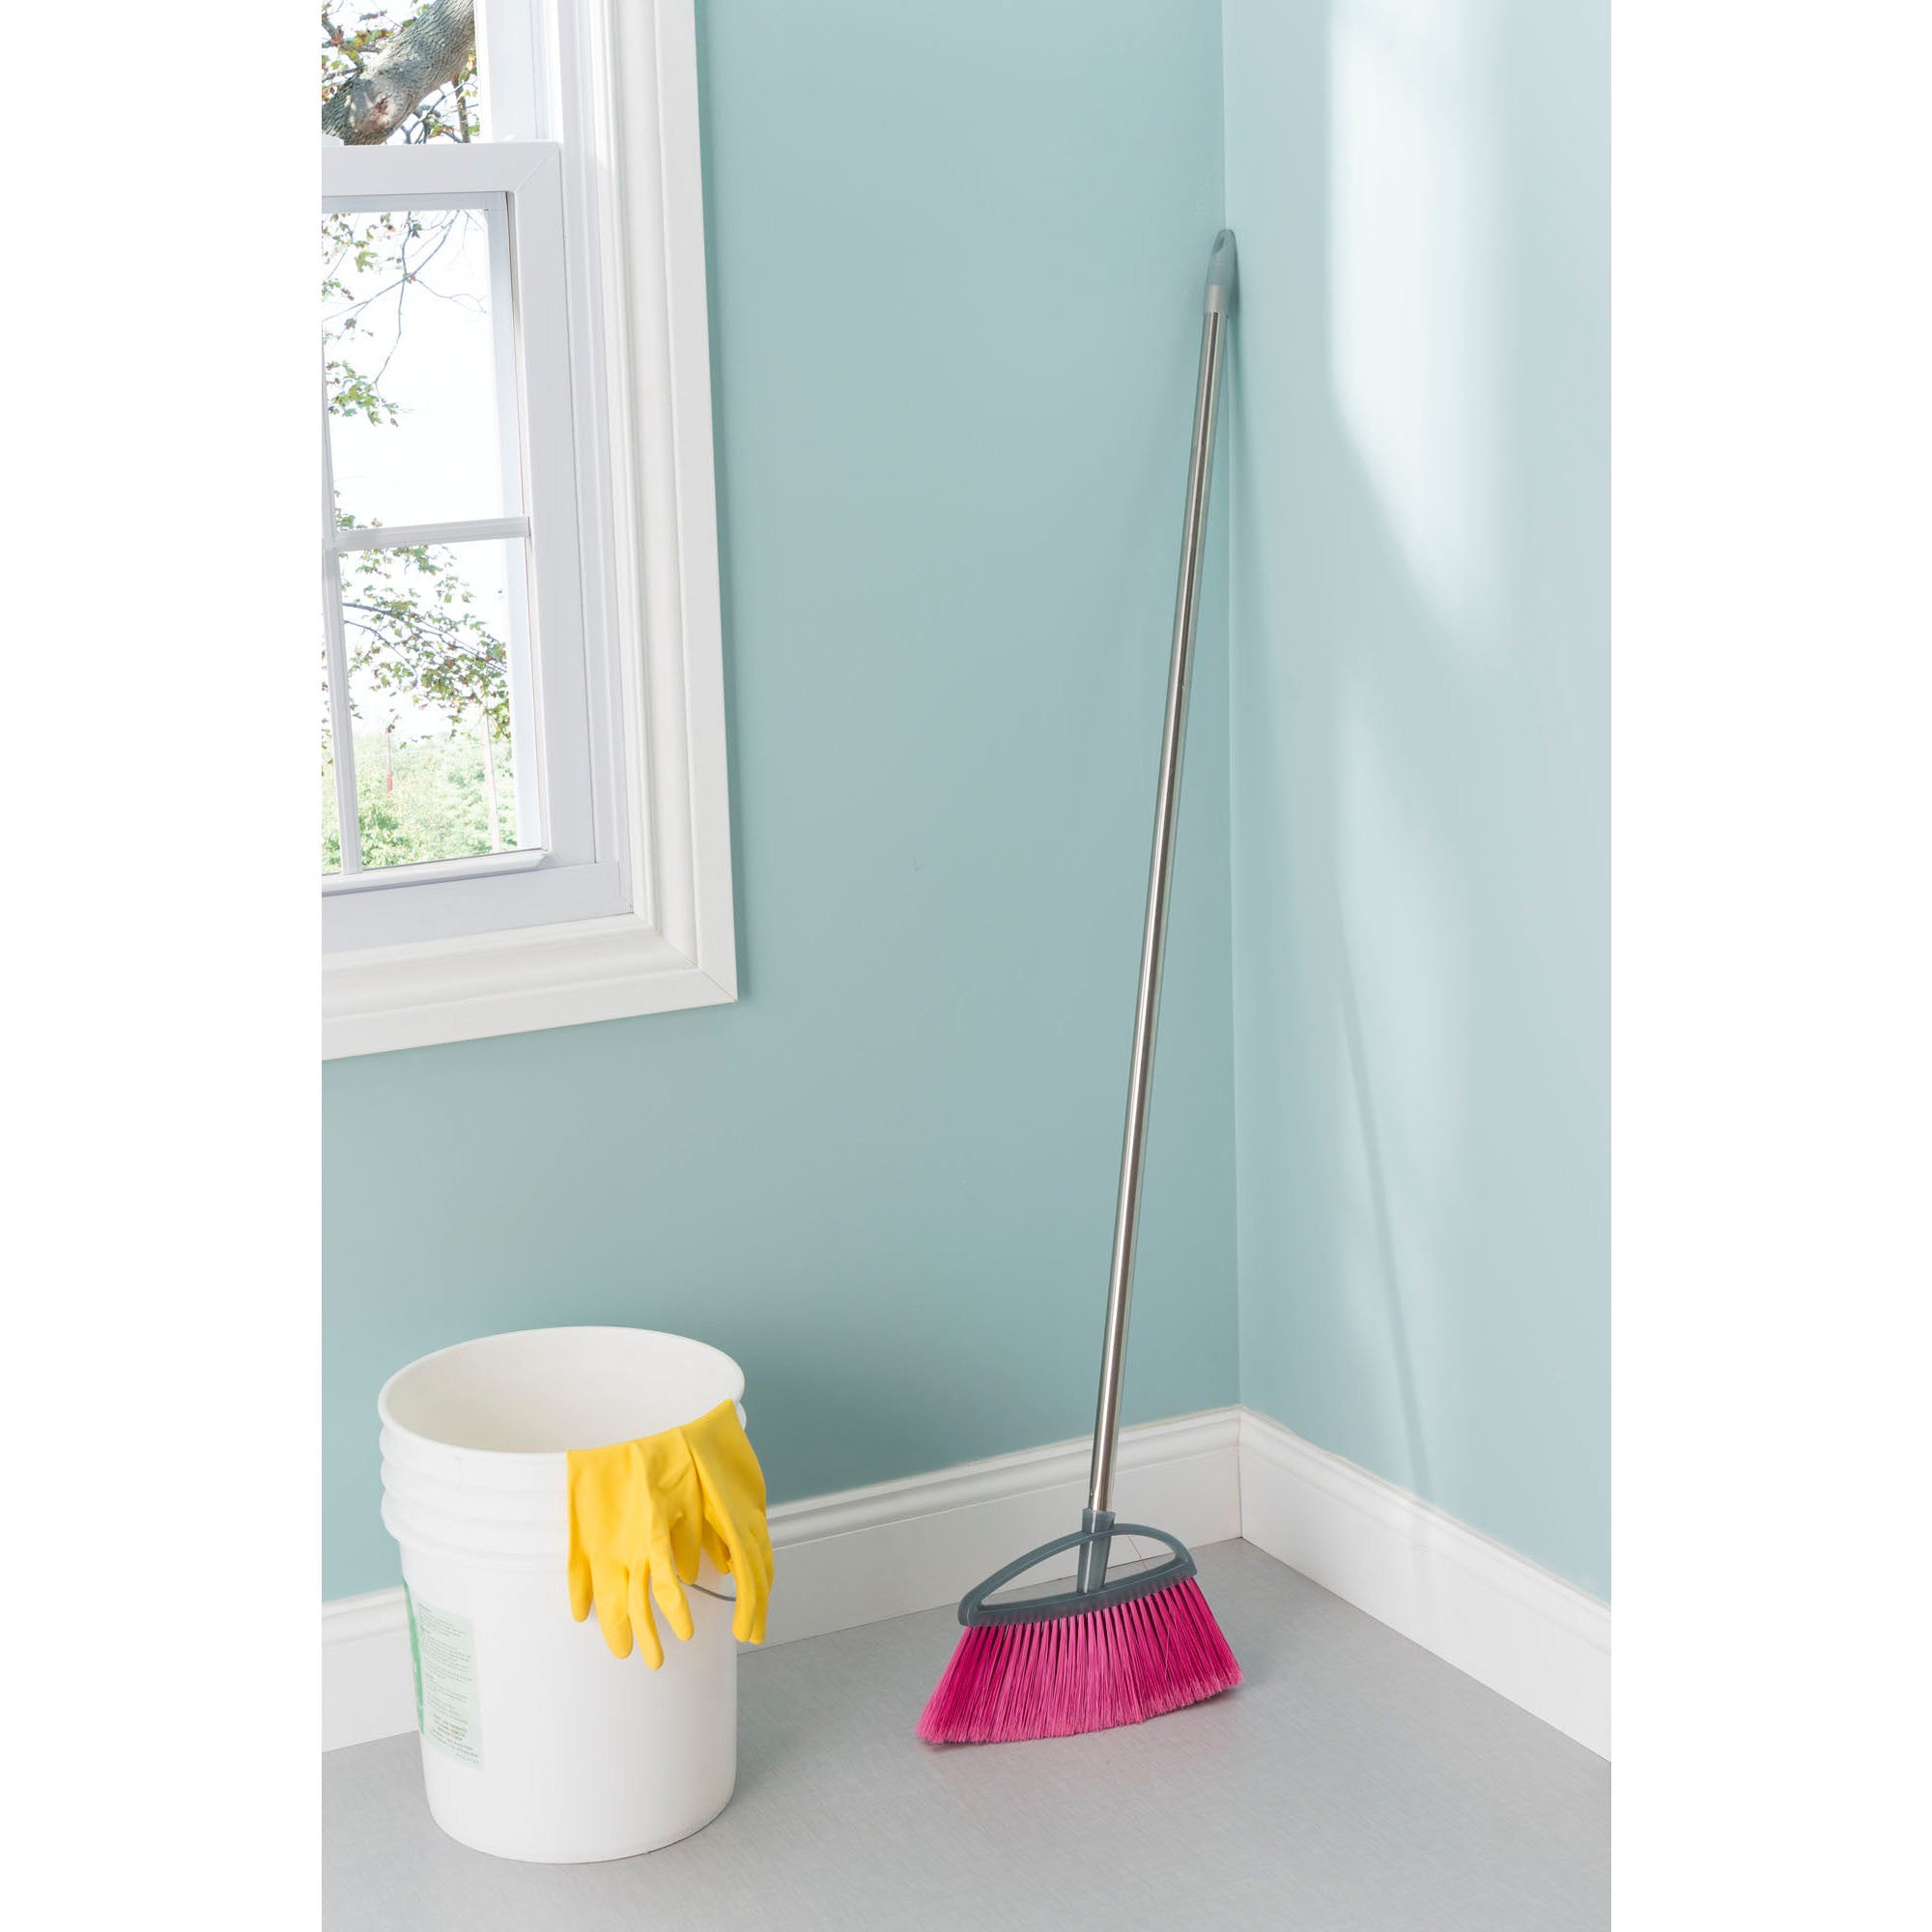 Home Basics ACE Stainless Steel Angle Broom - Assorted Colors